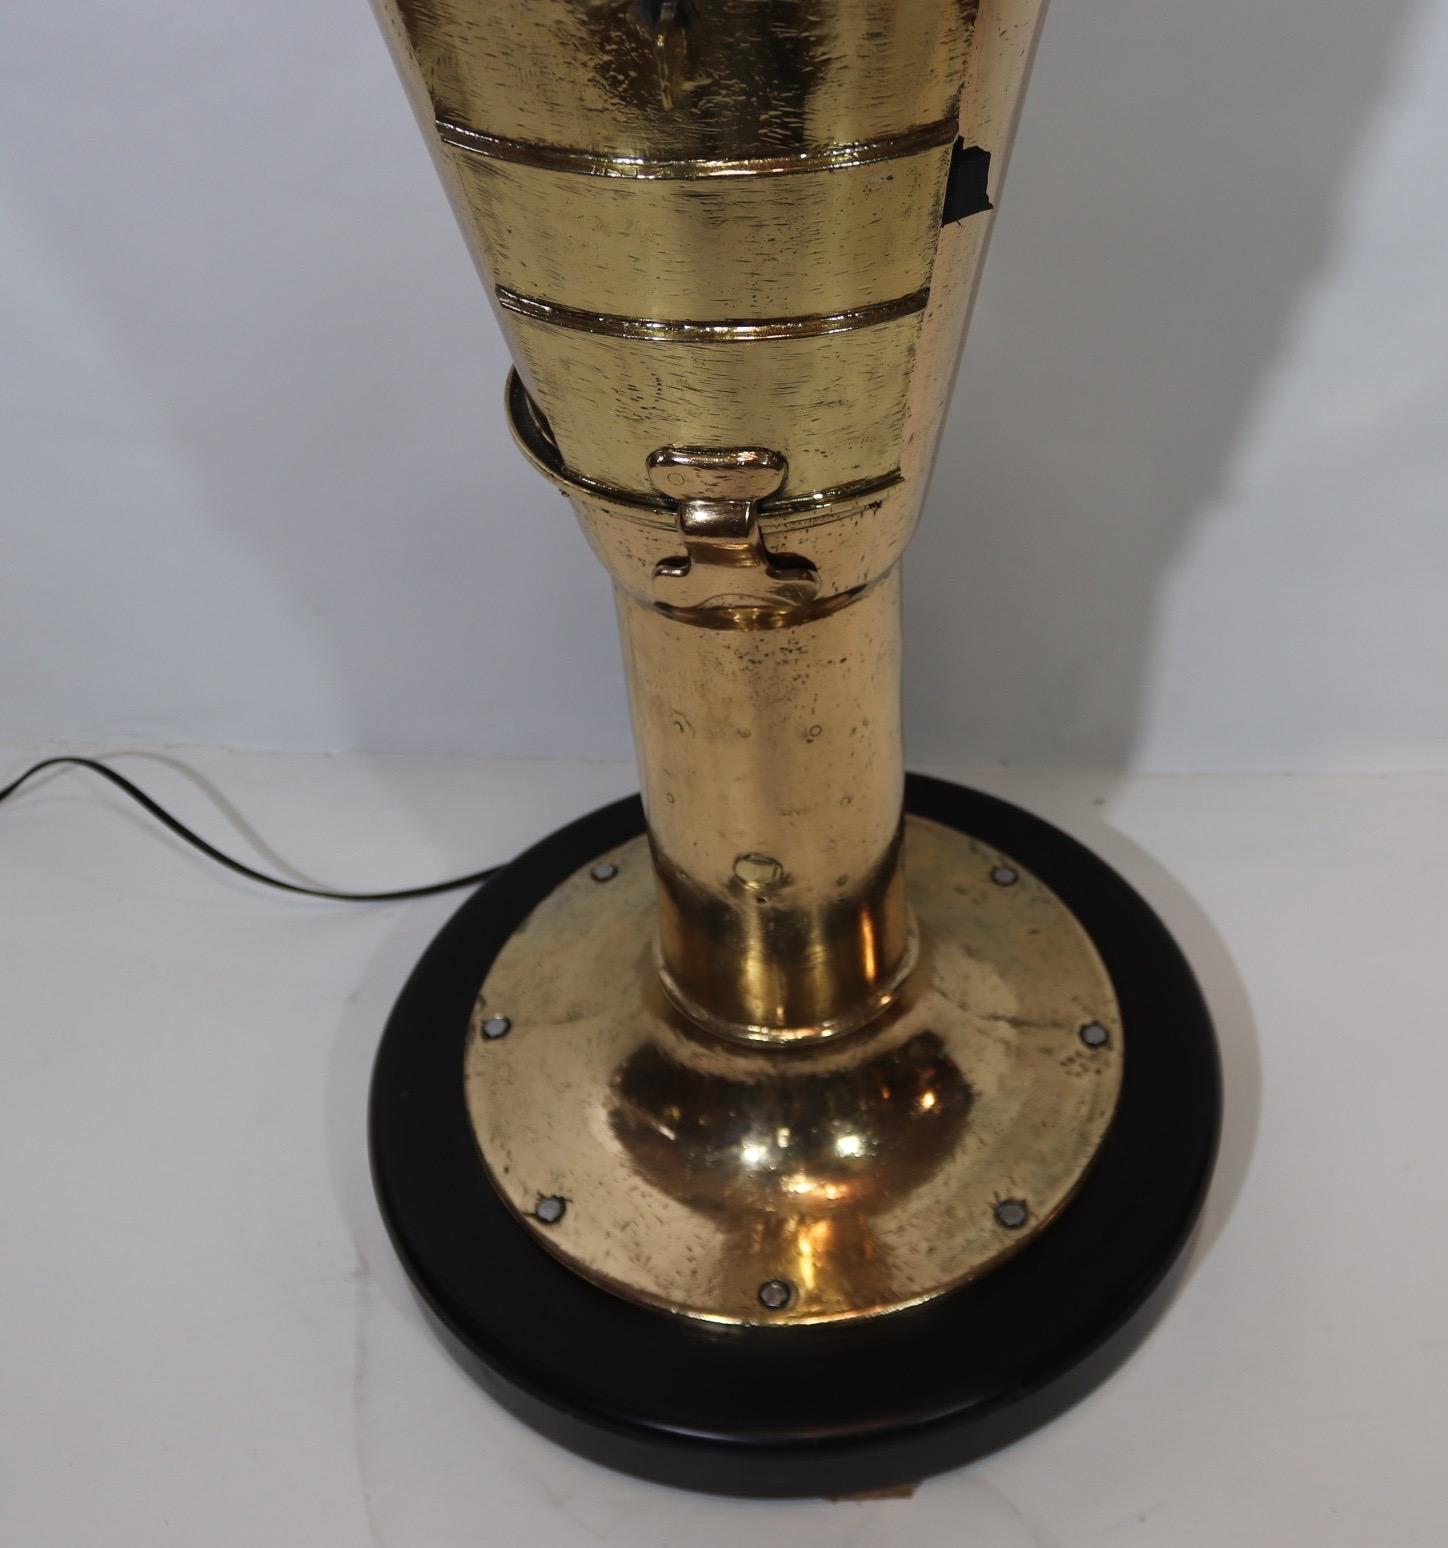 Outstanding World War I United States Navy highly polished ships binnacle. Fitted with a gimbaled compass by Kelvin White of Boston. Interior is painted white and recently wired for illumination. This unit glows like solid gold. Quite rare, circa